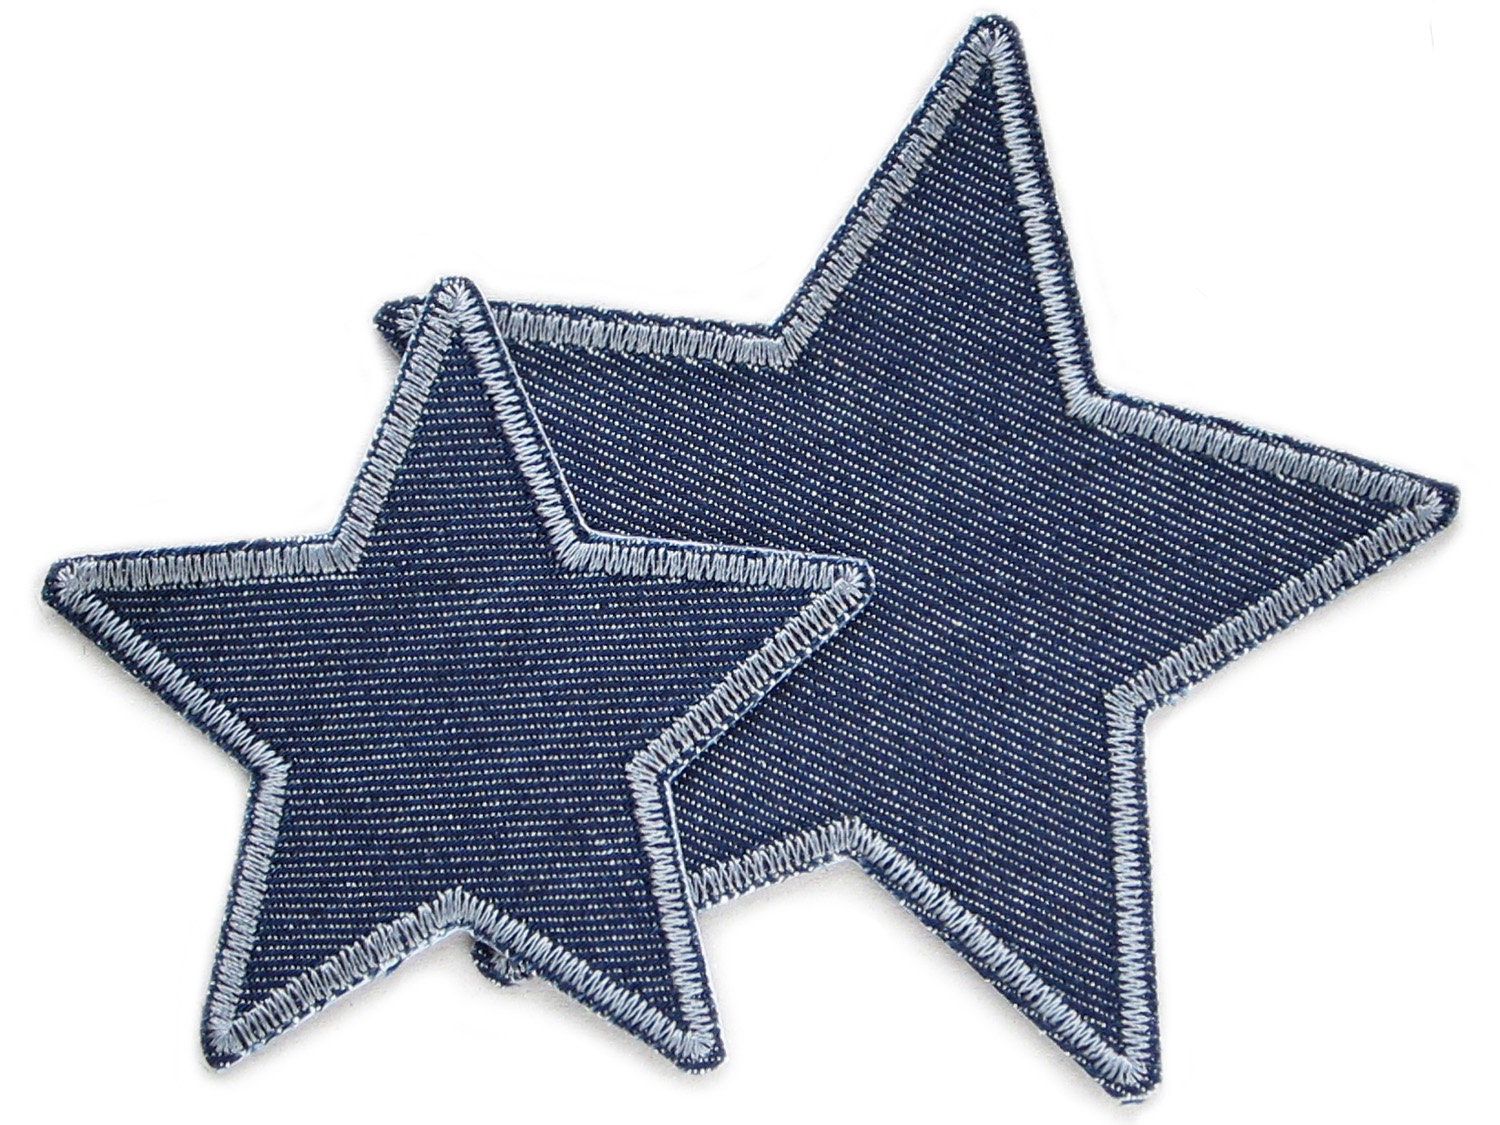 Star Jeans Patch Set of 2, Star Patch, Iron-on Patch Children/Adults,  Trouser Patch